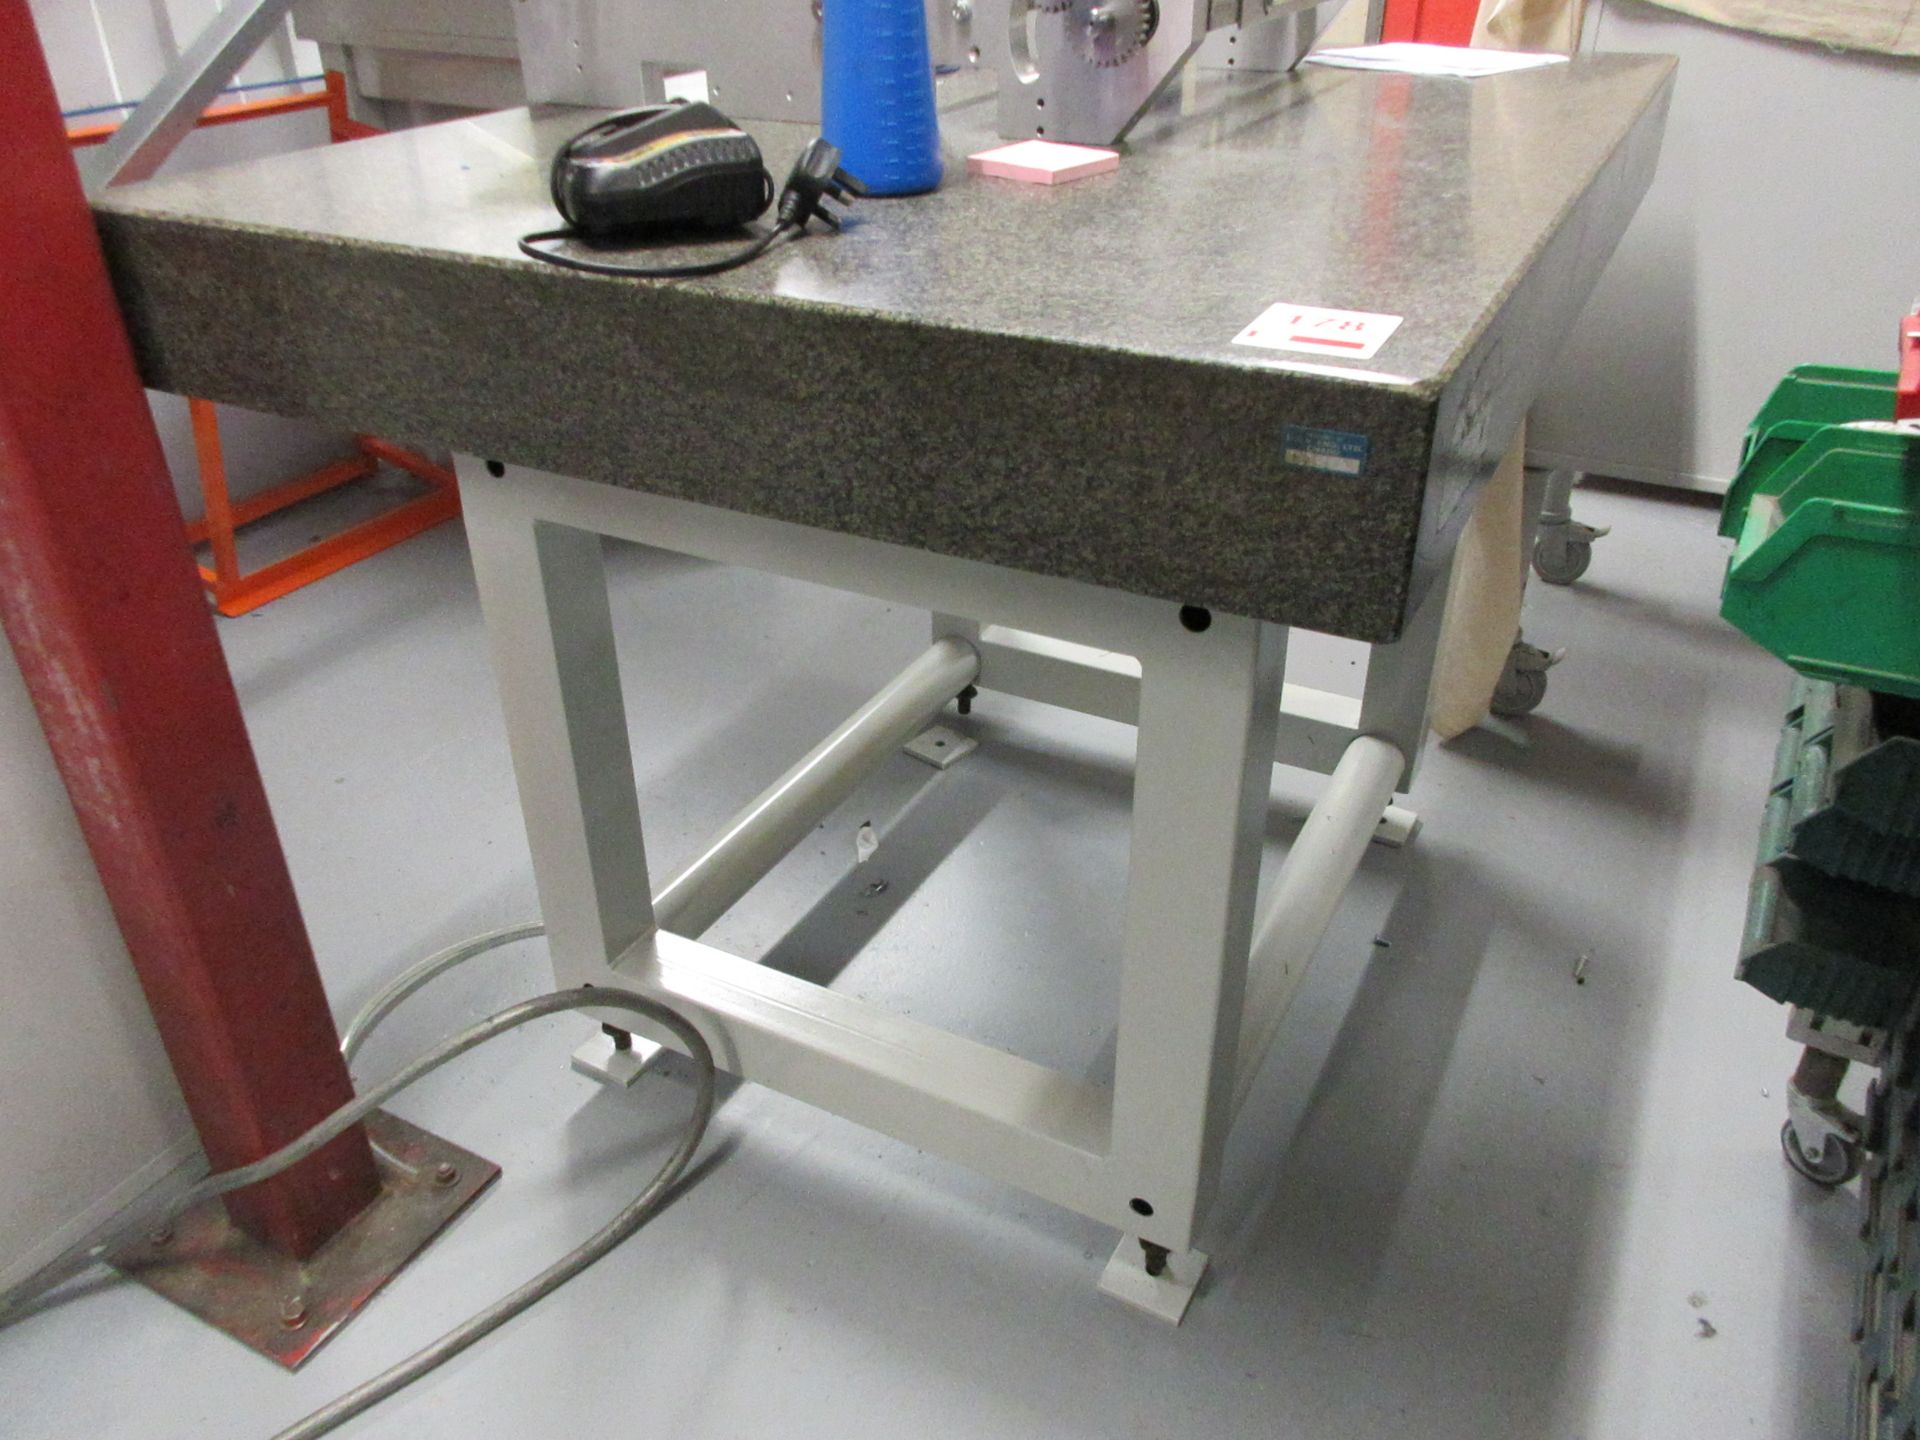 Granite surface table, 4' x 3', mounted on stand